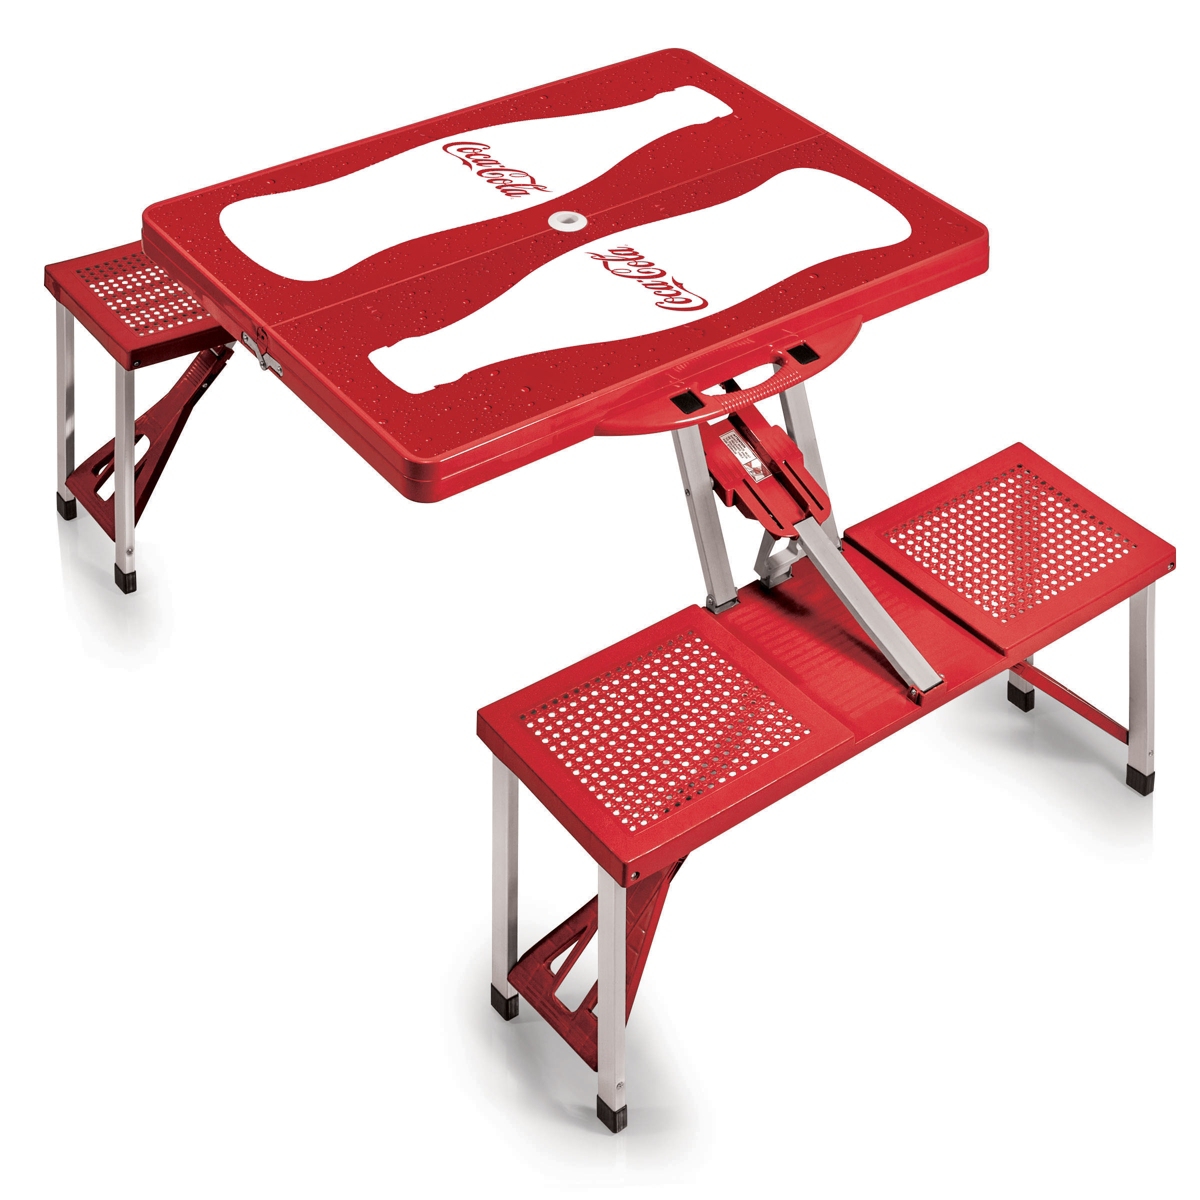 by Picnic Time Coca-Cola Picnic Table Portable Folding Table with Seats - Red